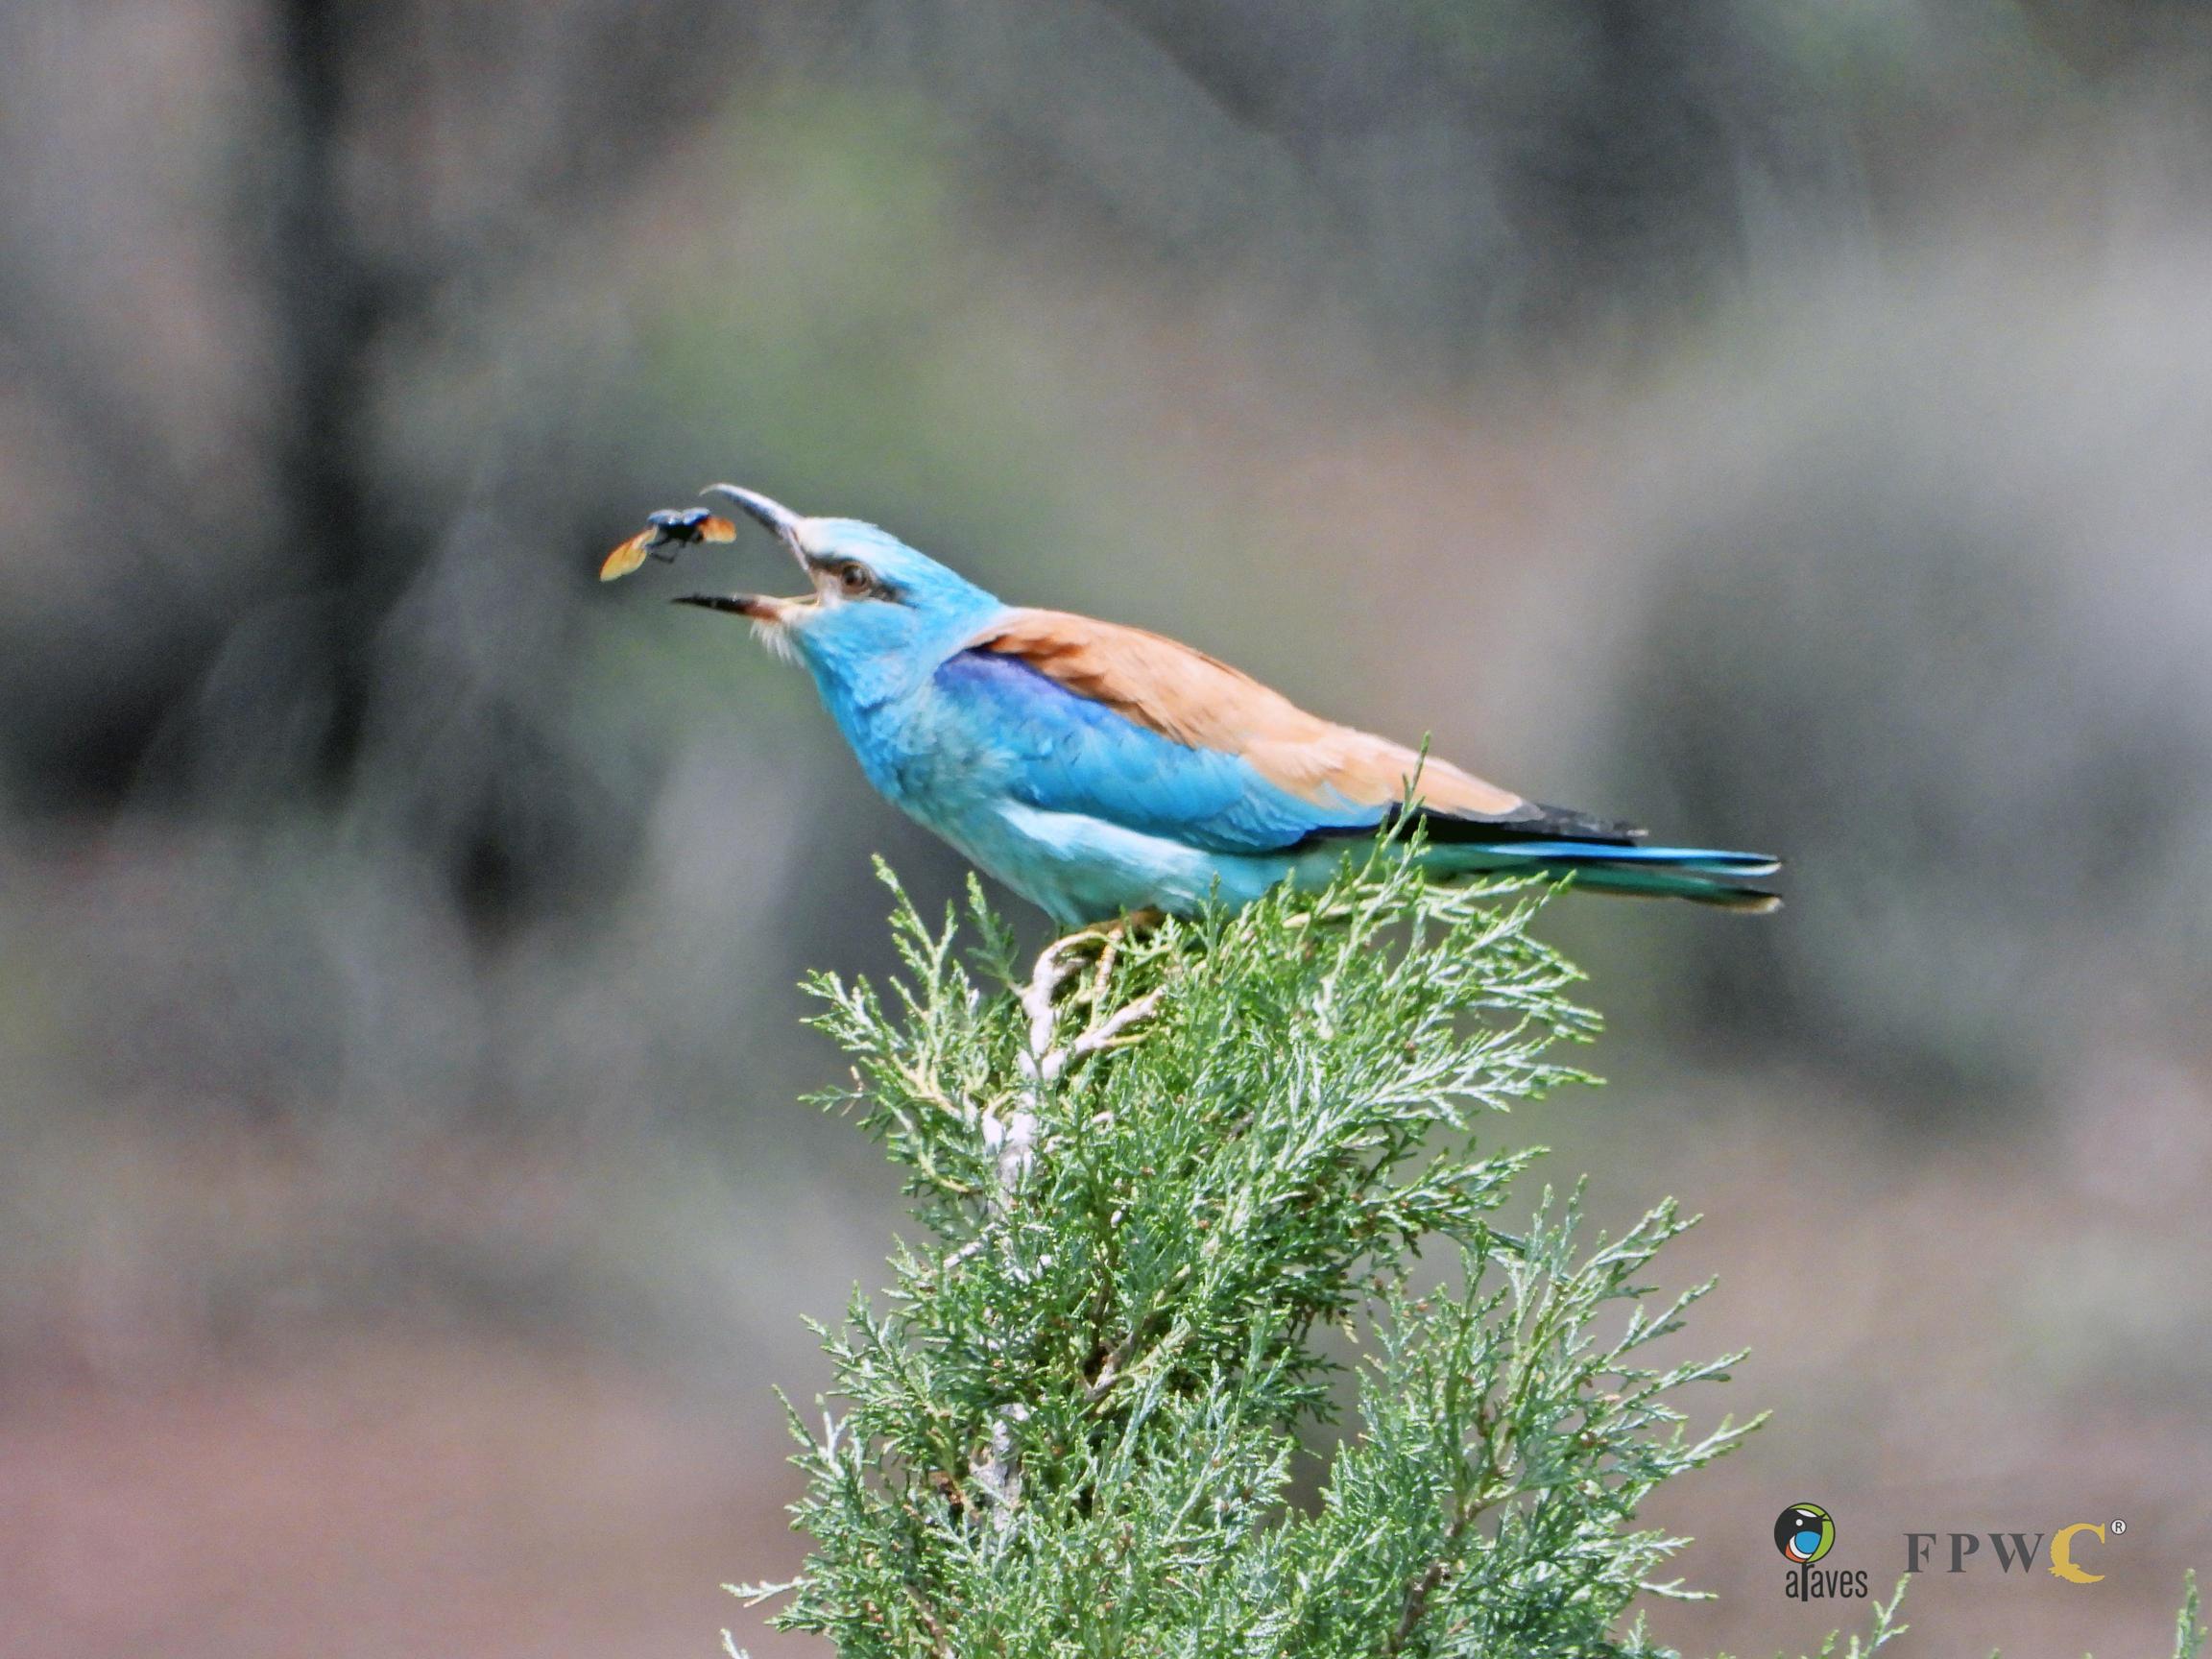 The Roller, a colourful bird with an insect